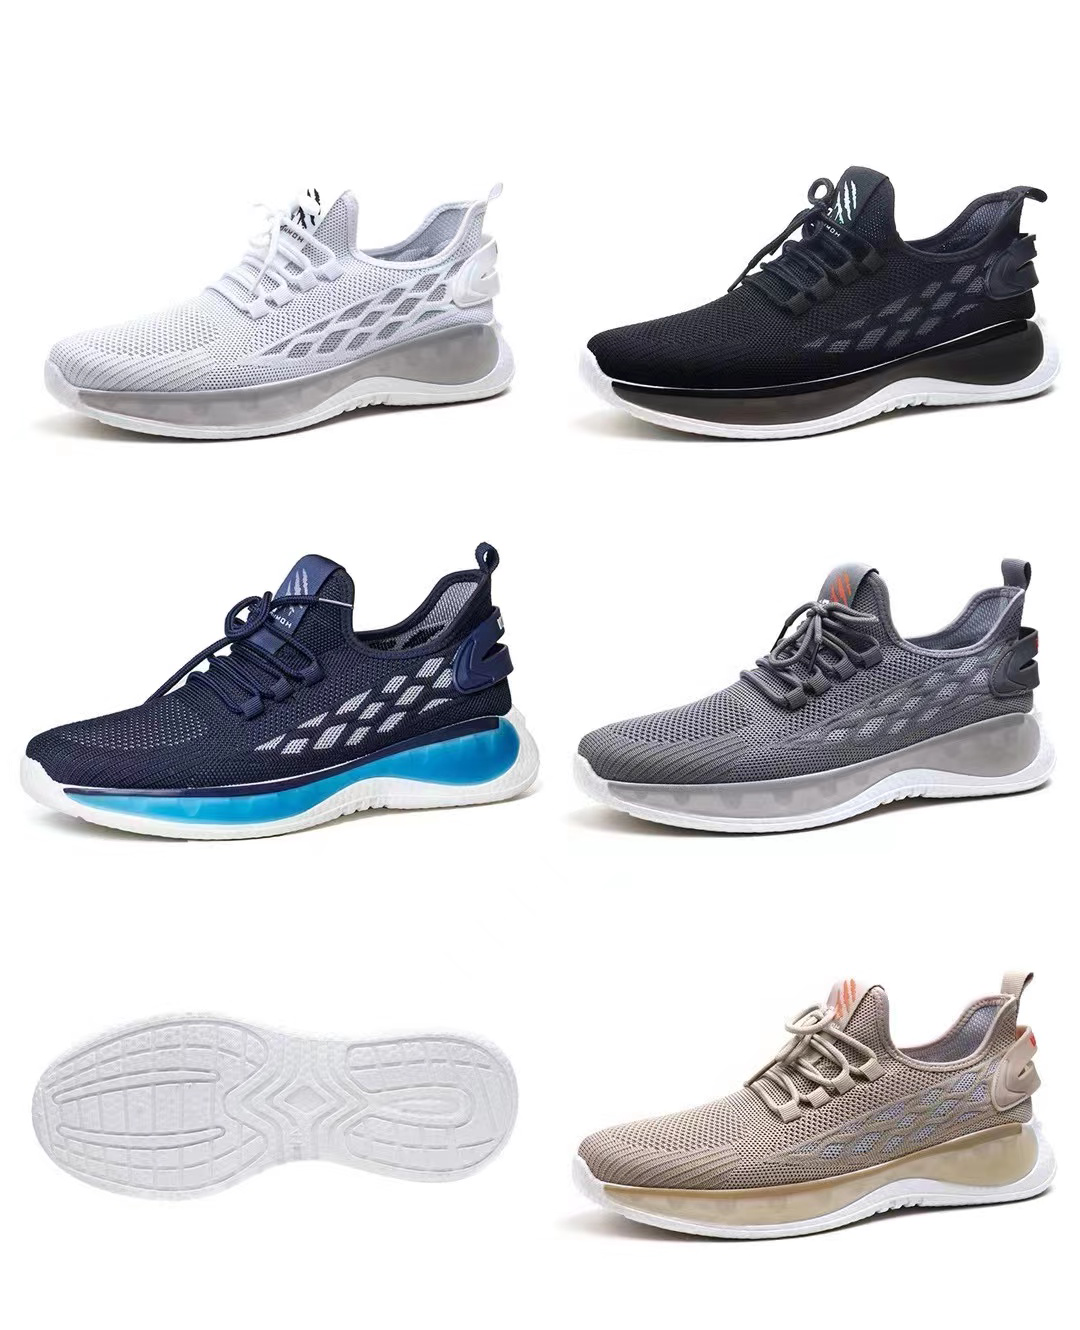 New style fashion sport shoes for men 1. ITEM NO: Z26-2207-4...